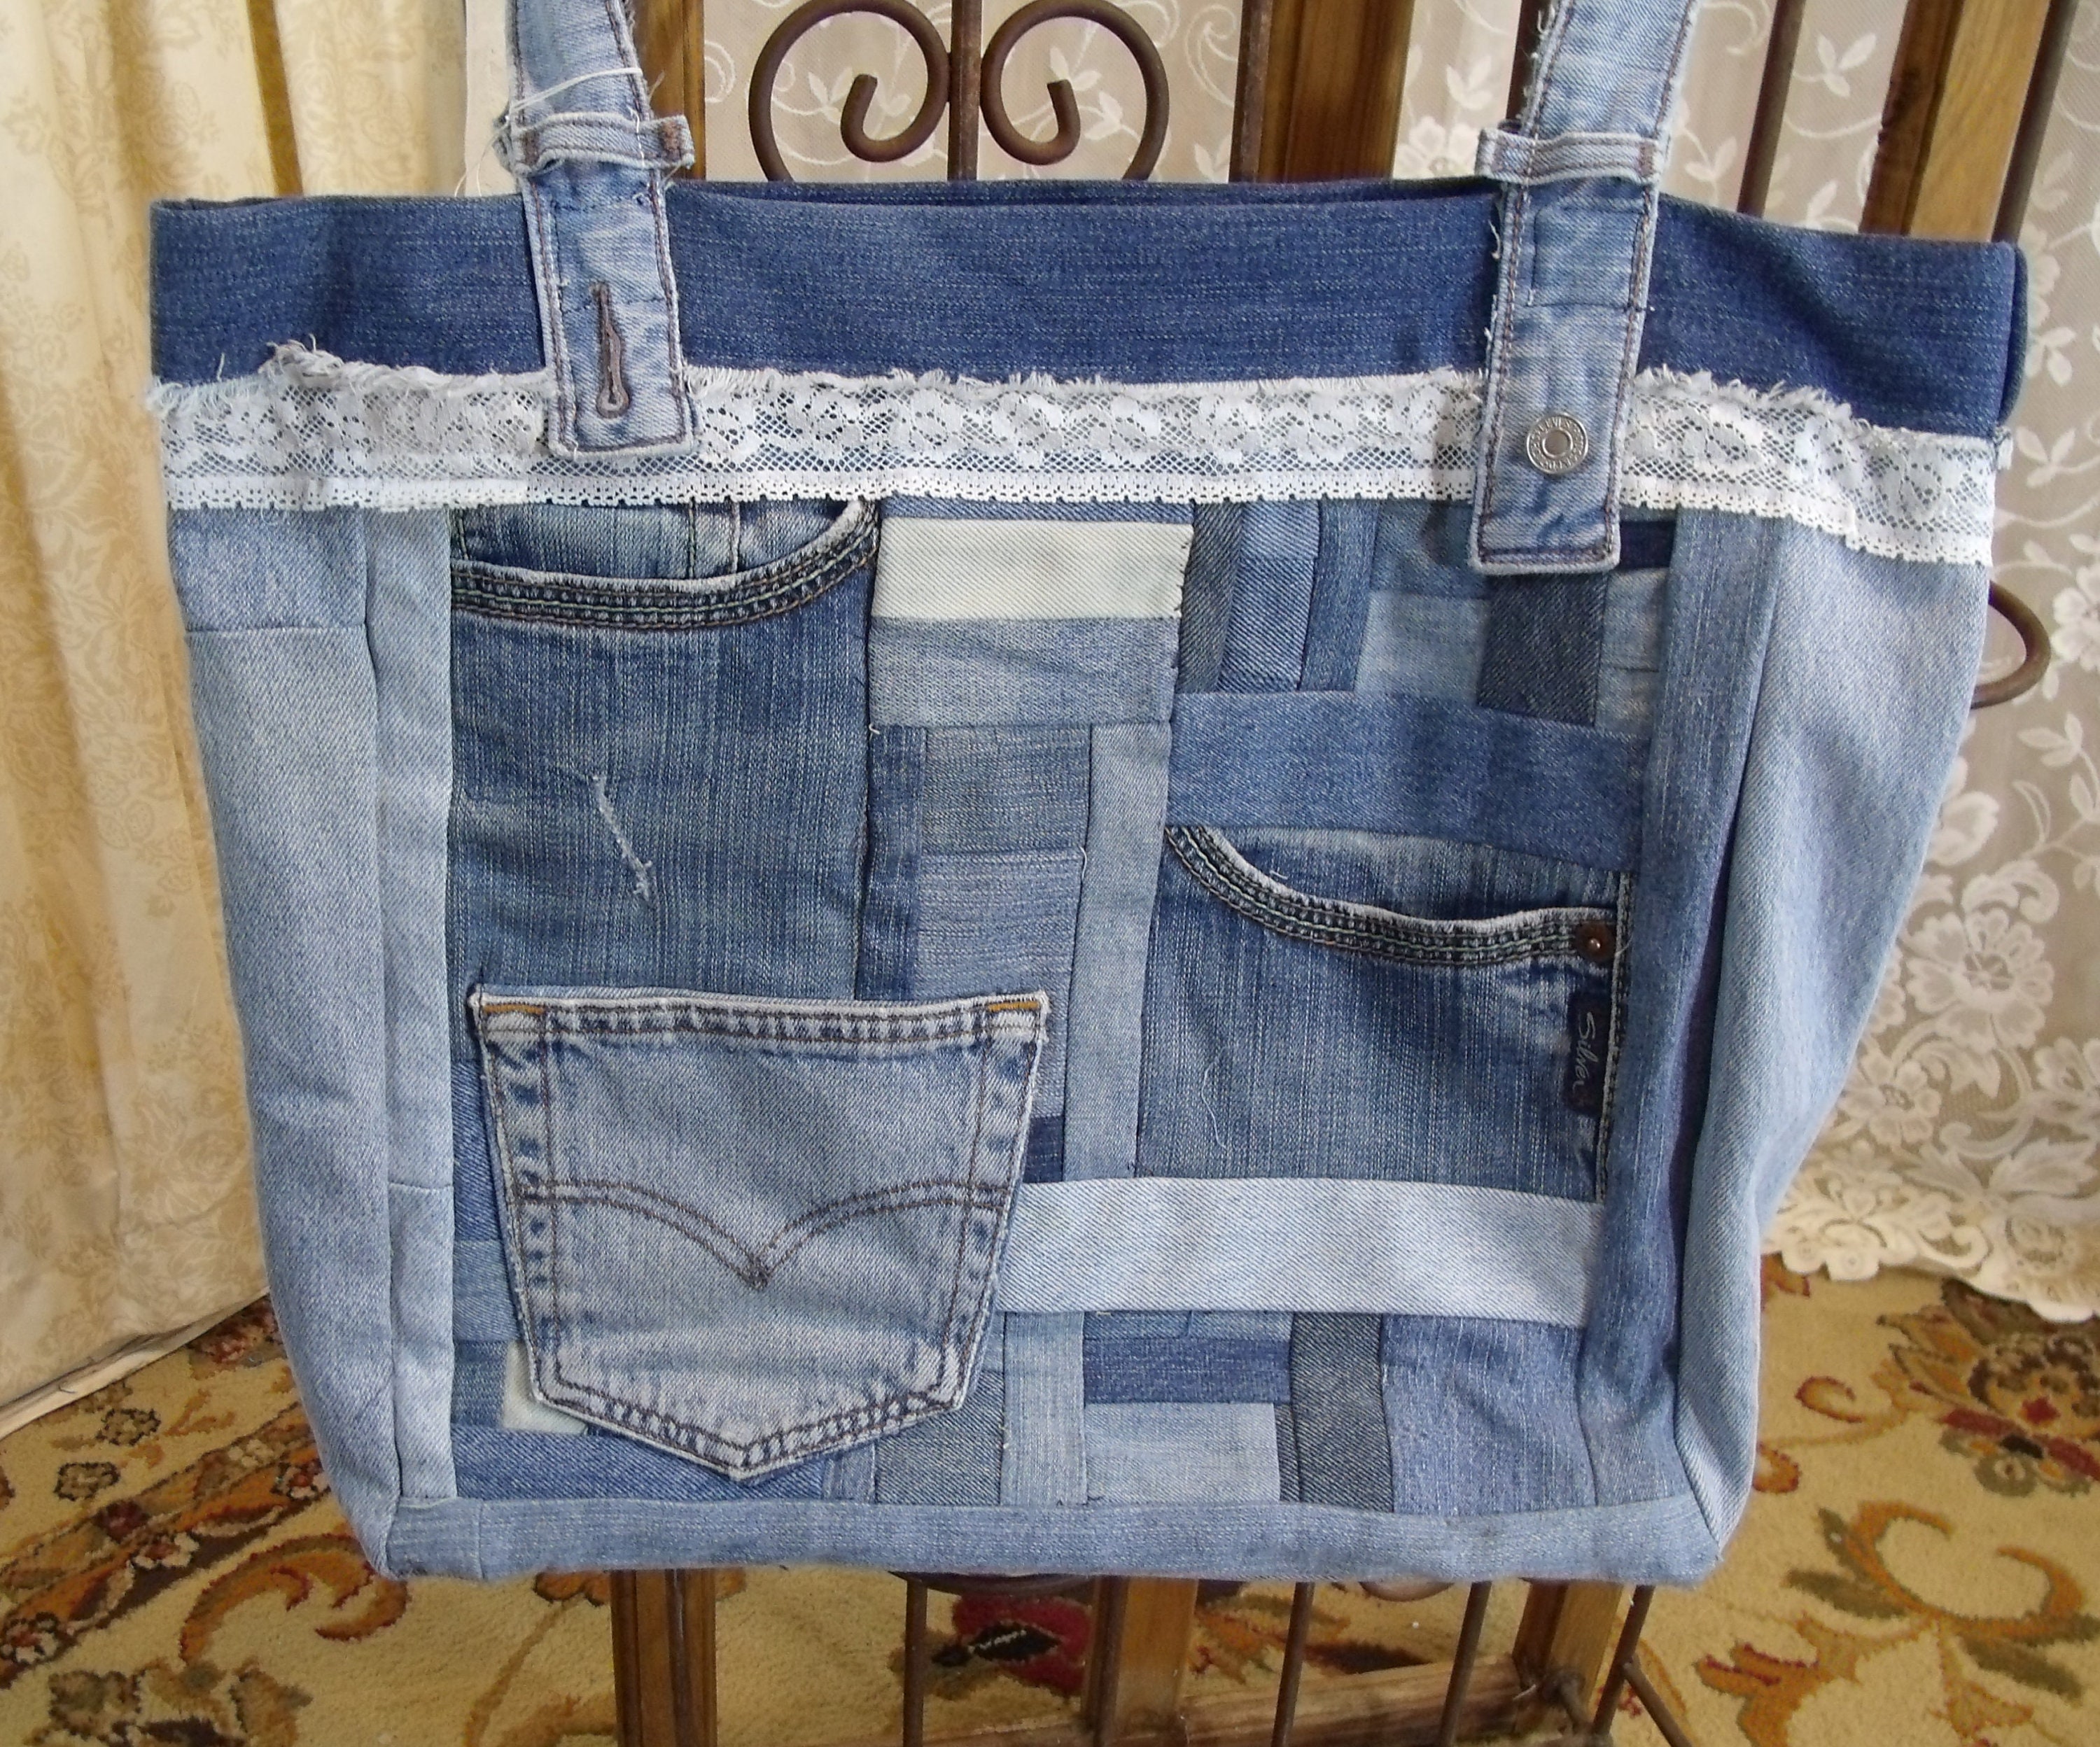 Recycled Jeans Shoulder Bag 16x16x5 Shabby-chic Hobo - Etsy